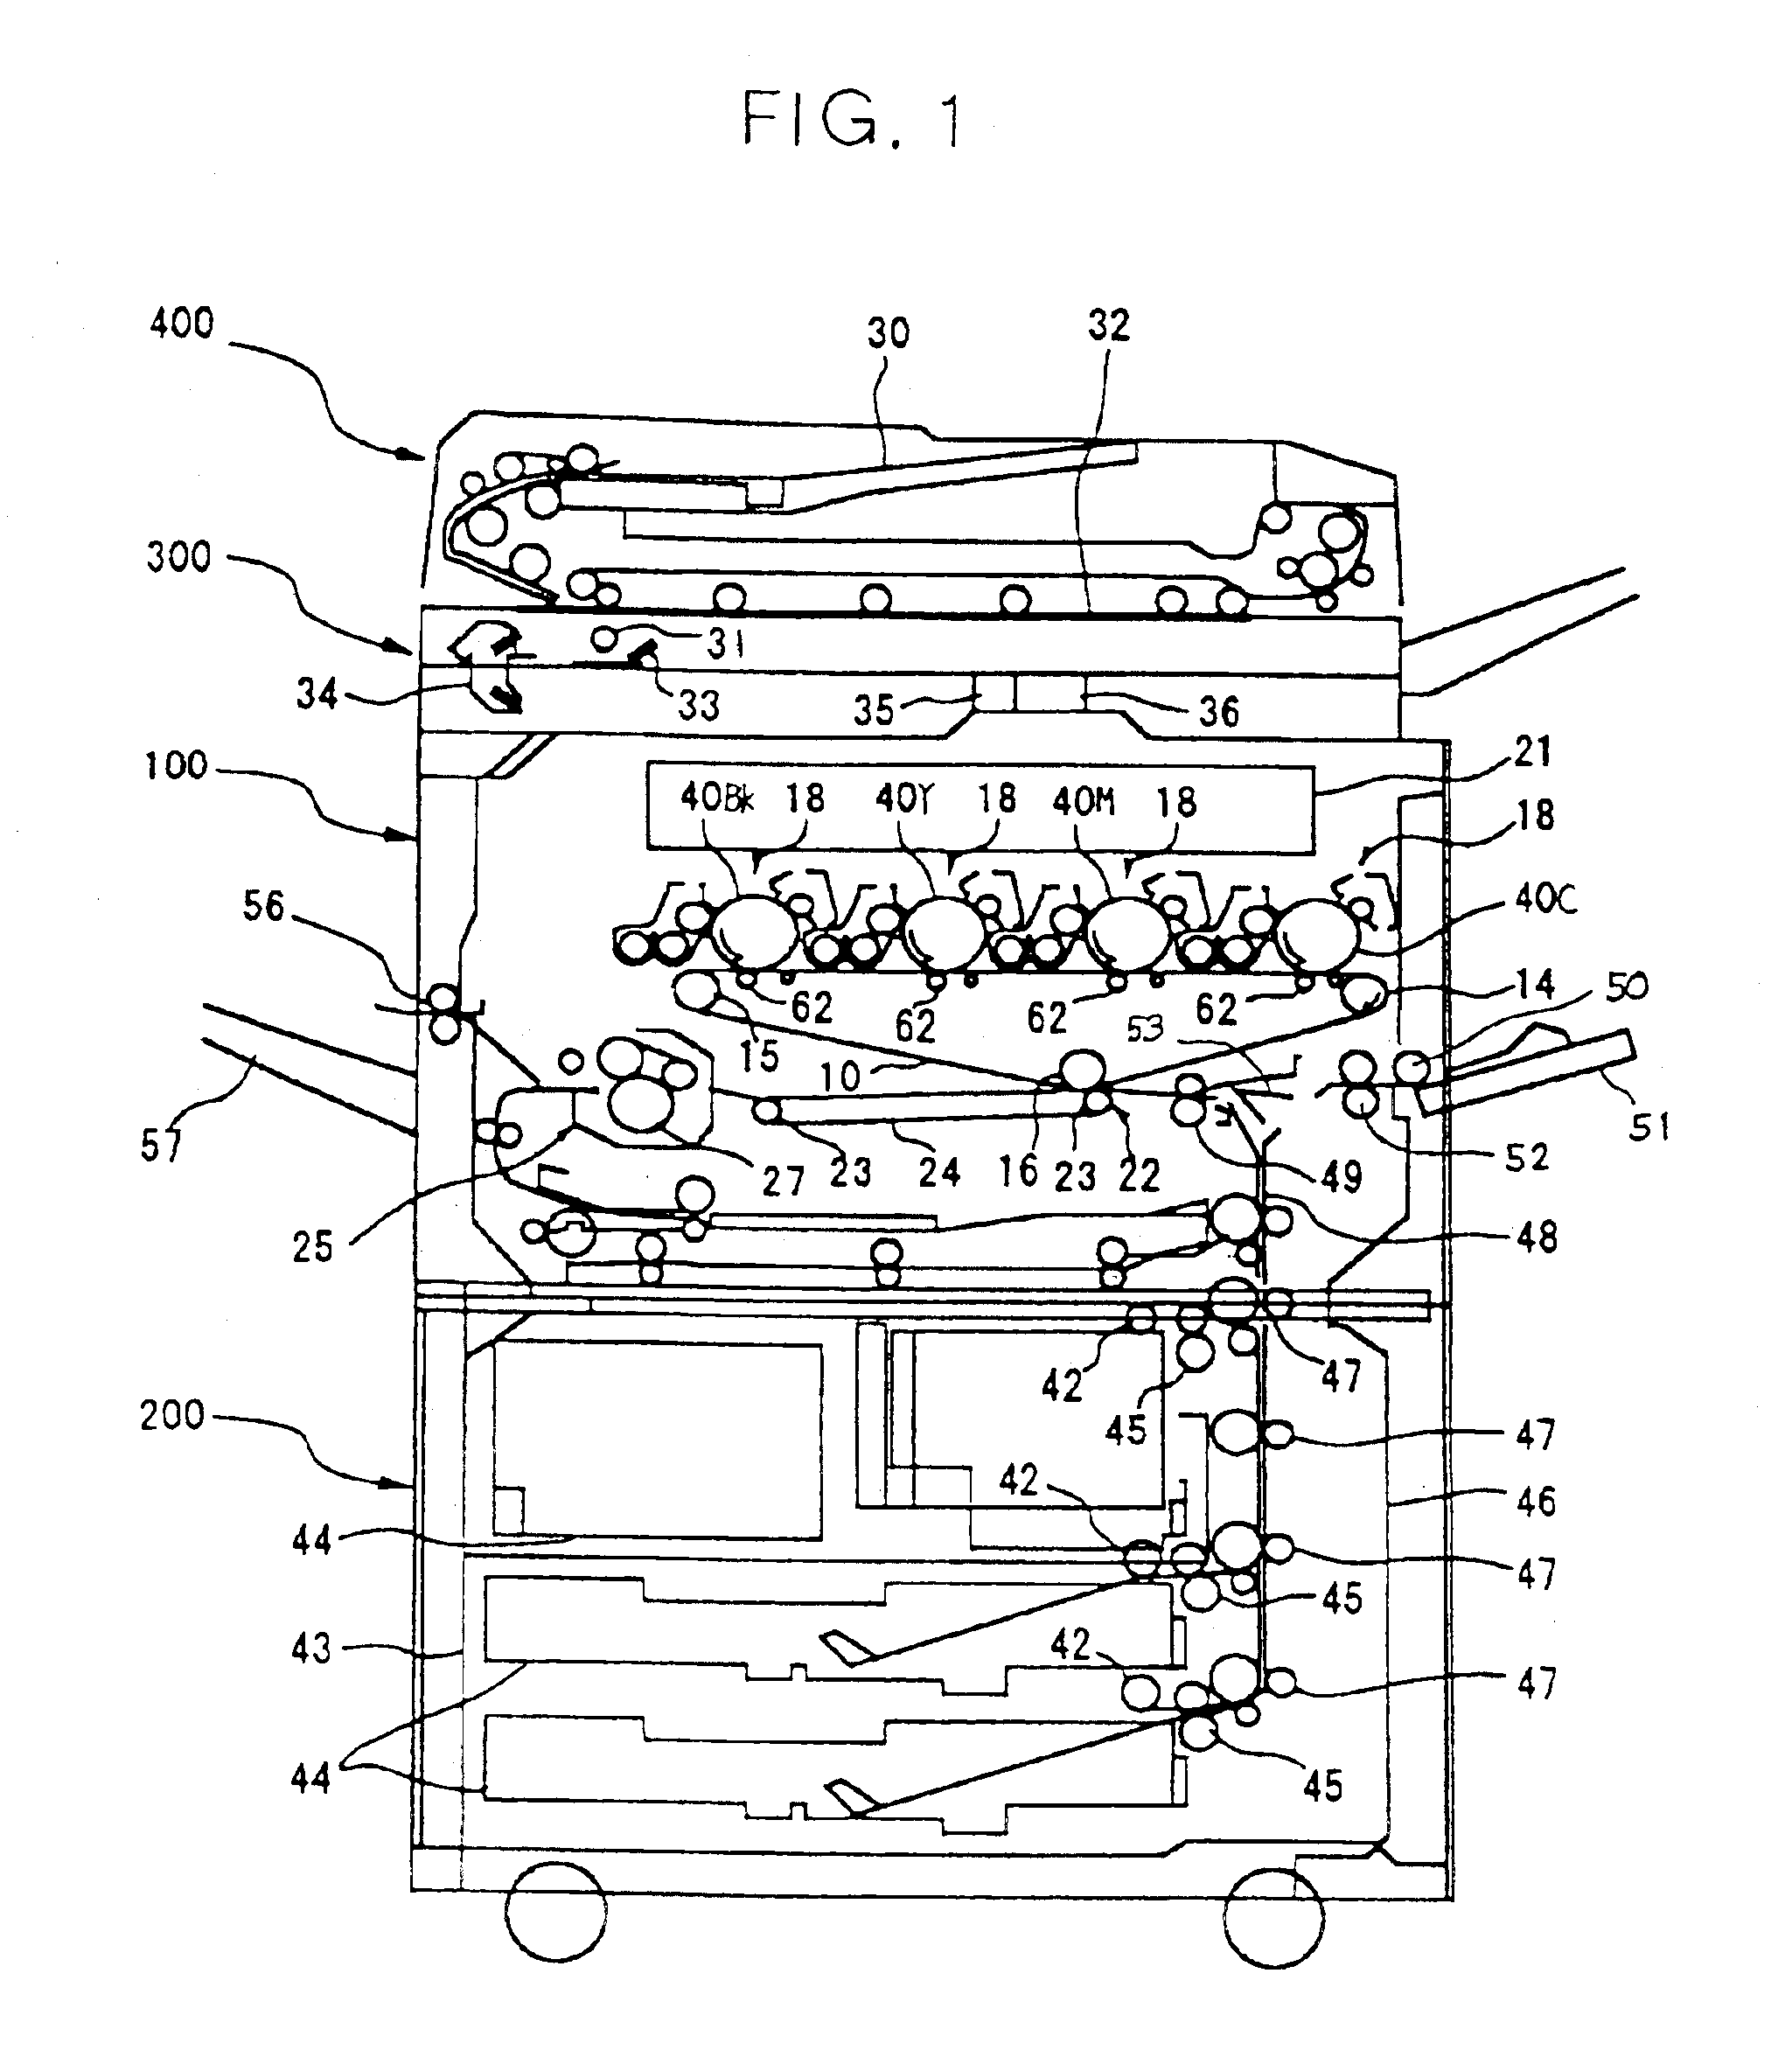 Image forming apparatus with photoconductive element and intermediate image transfer member